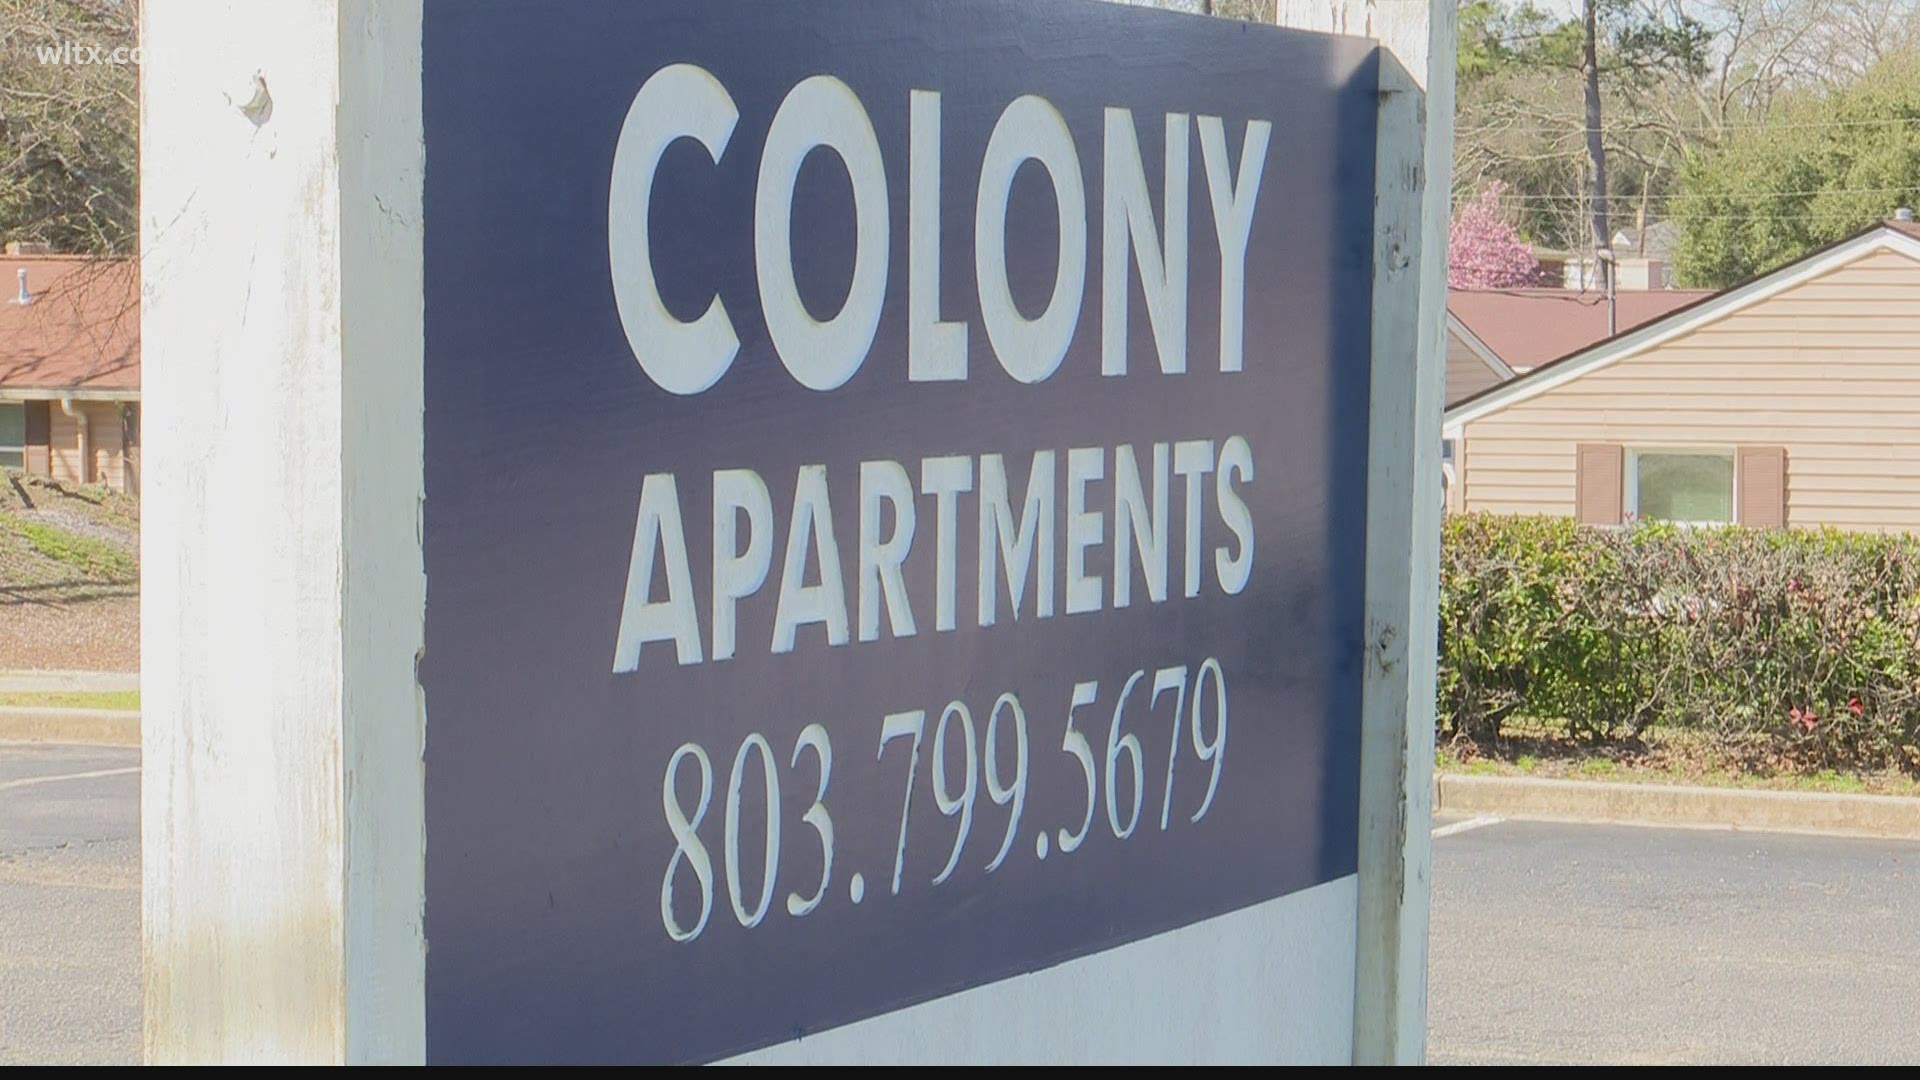 Four women have been arrested and one man is wanted in connection to an assault at the Colony Apartments on Monday.